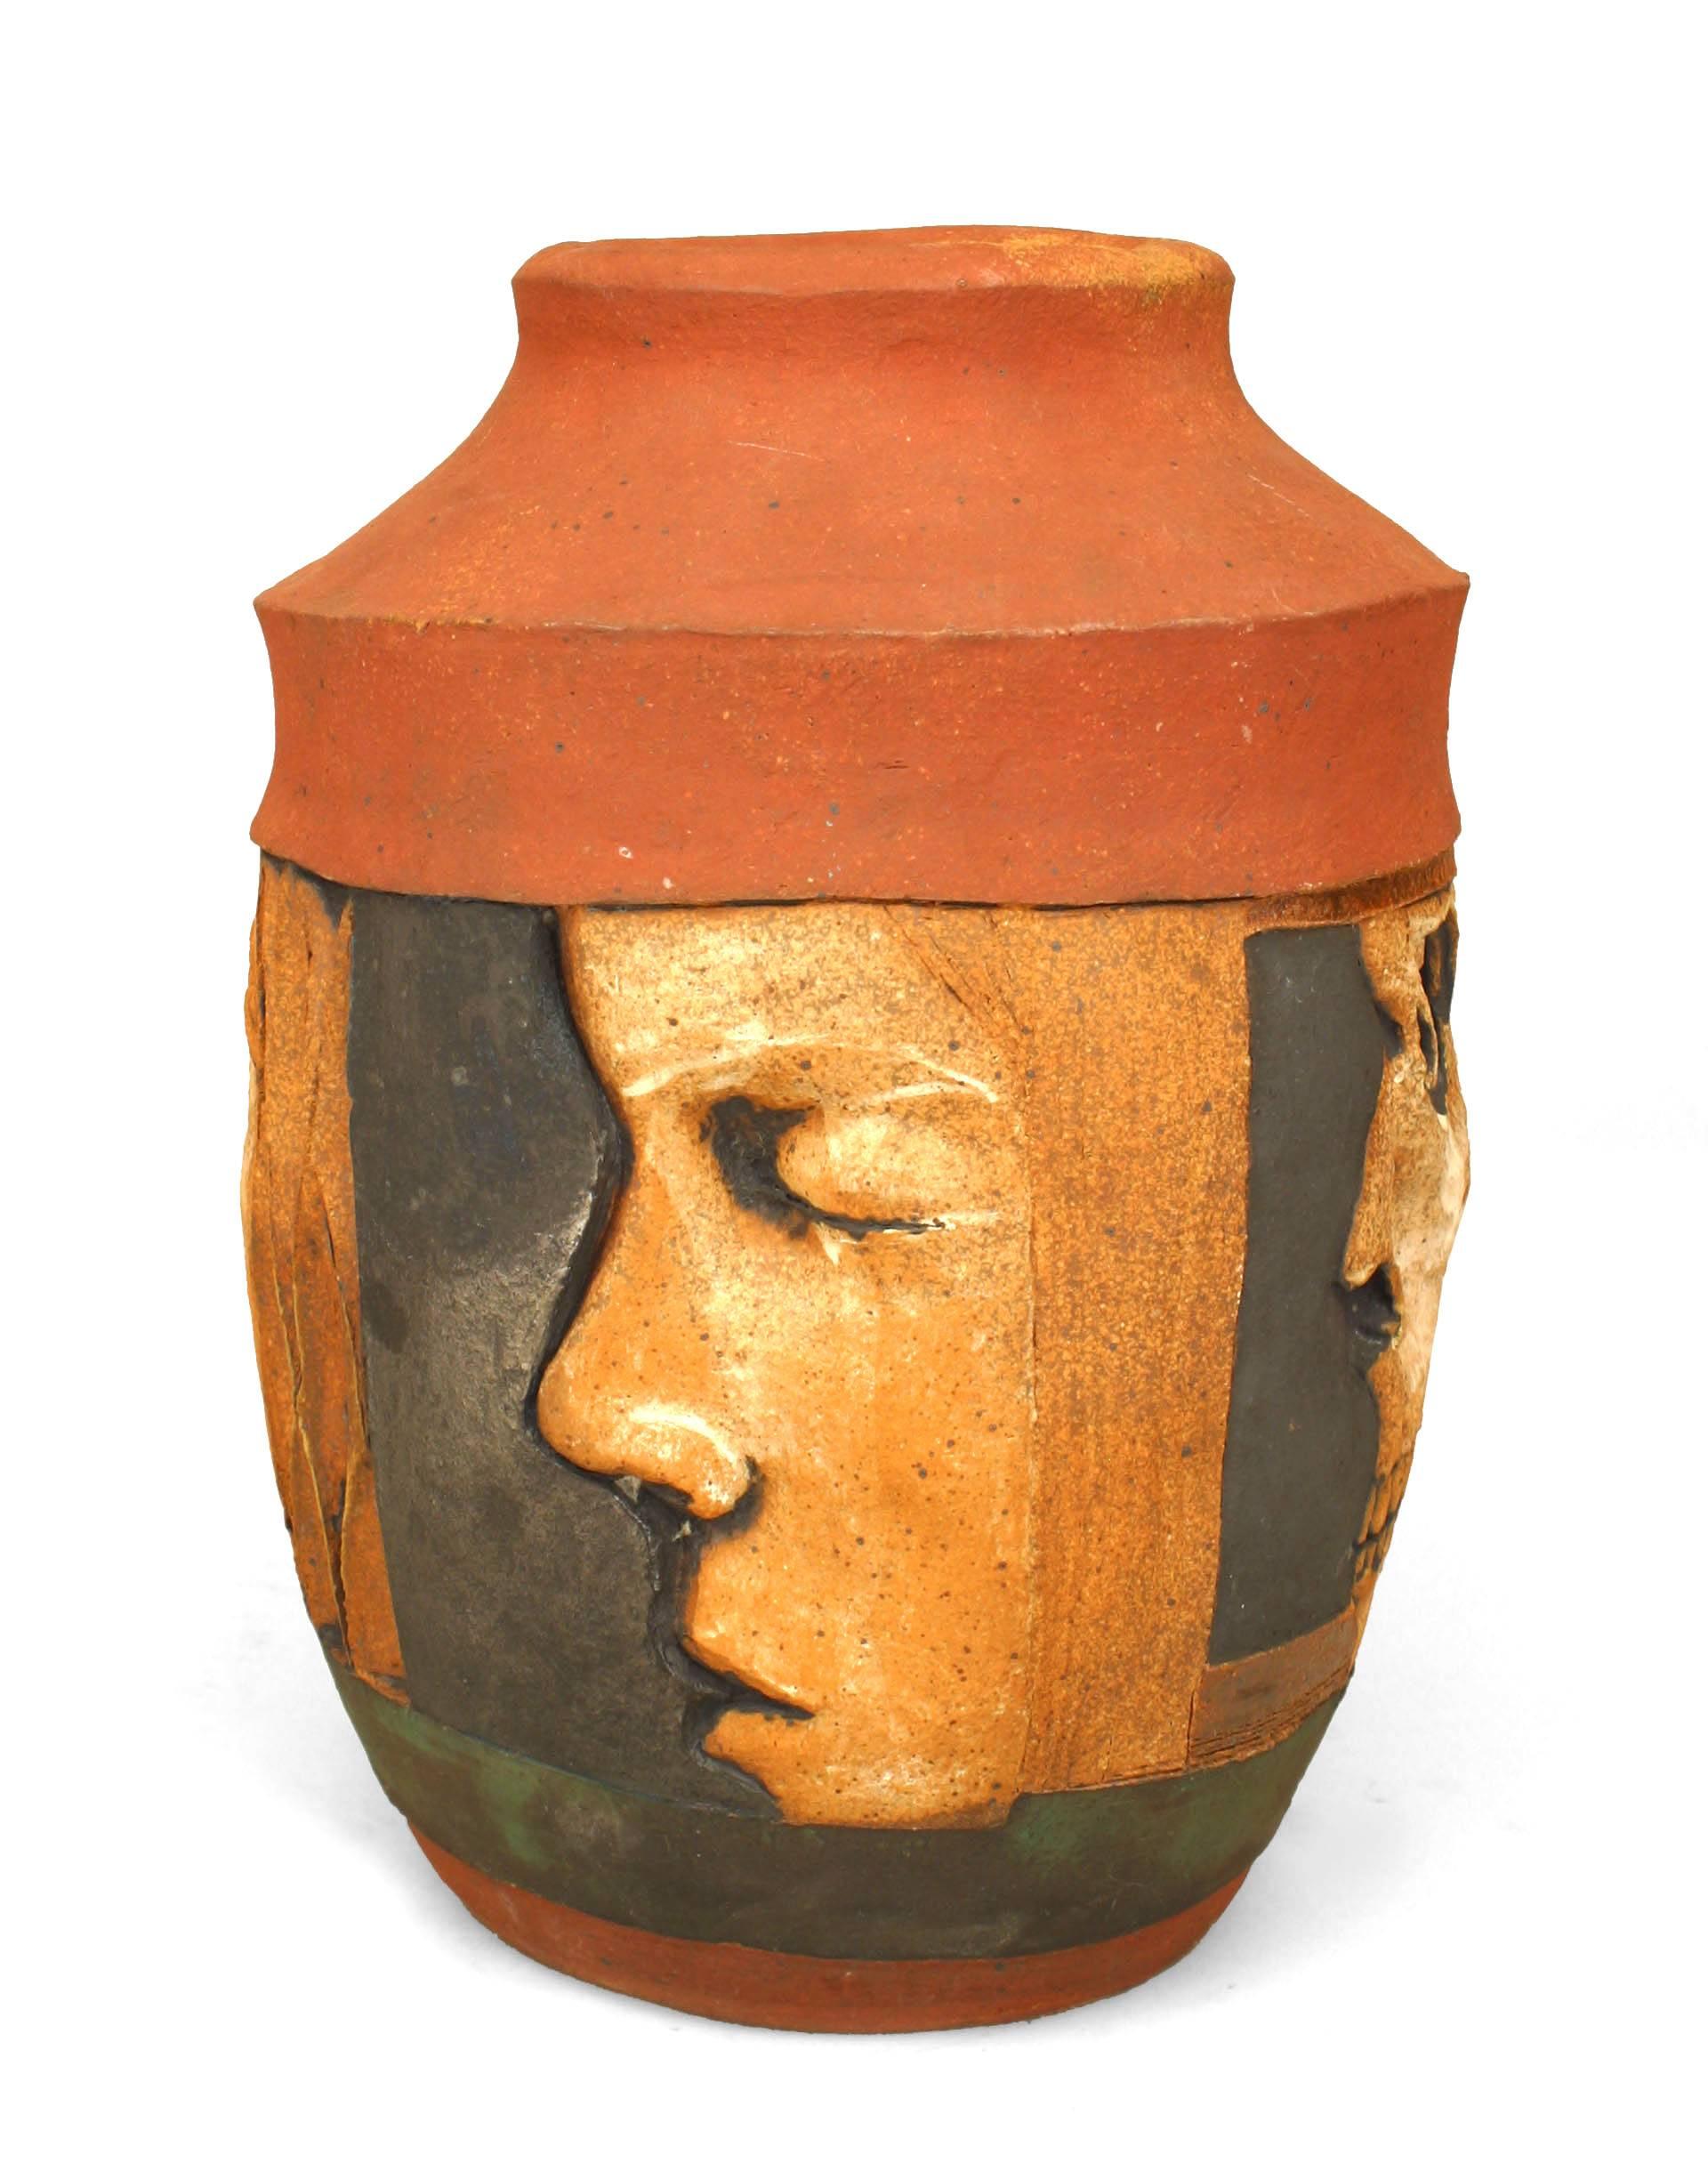 American Post-War Design terra cotta and black trimmed vase with 4 profiles of faces in relief. (by ROBERT BENTLEY)
